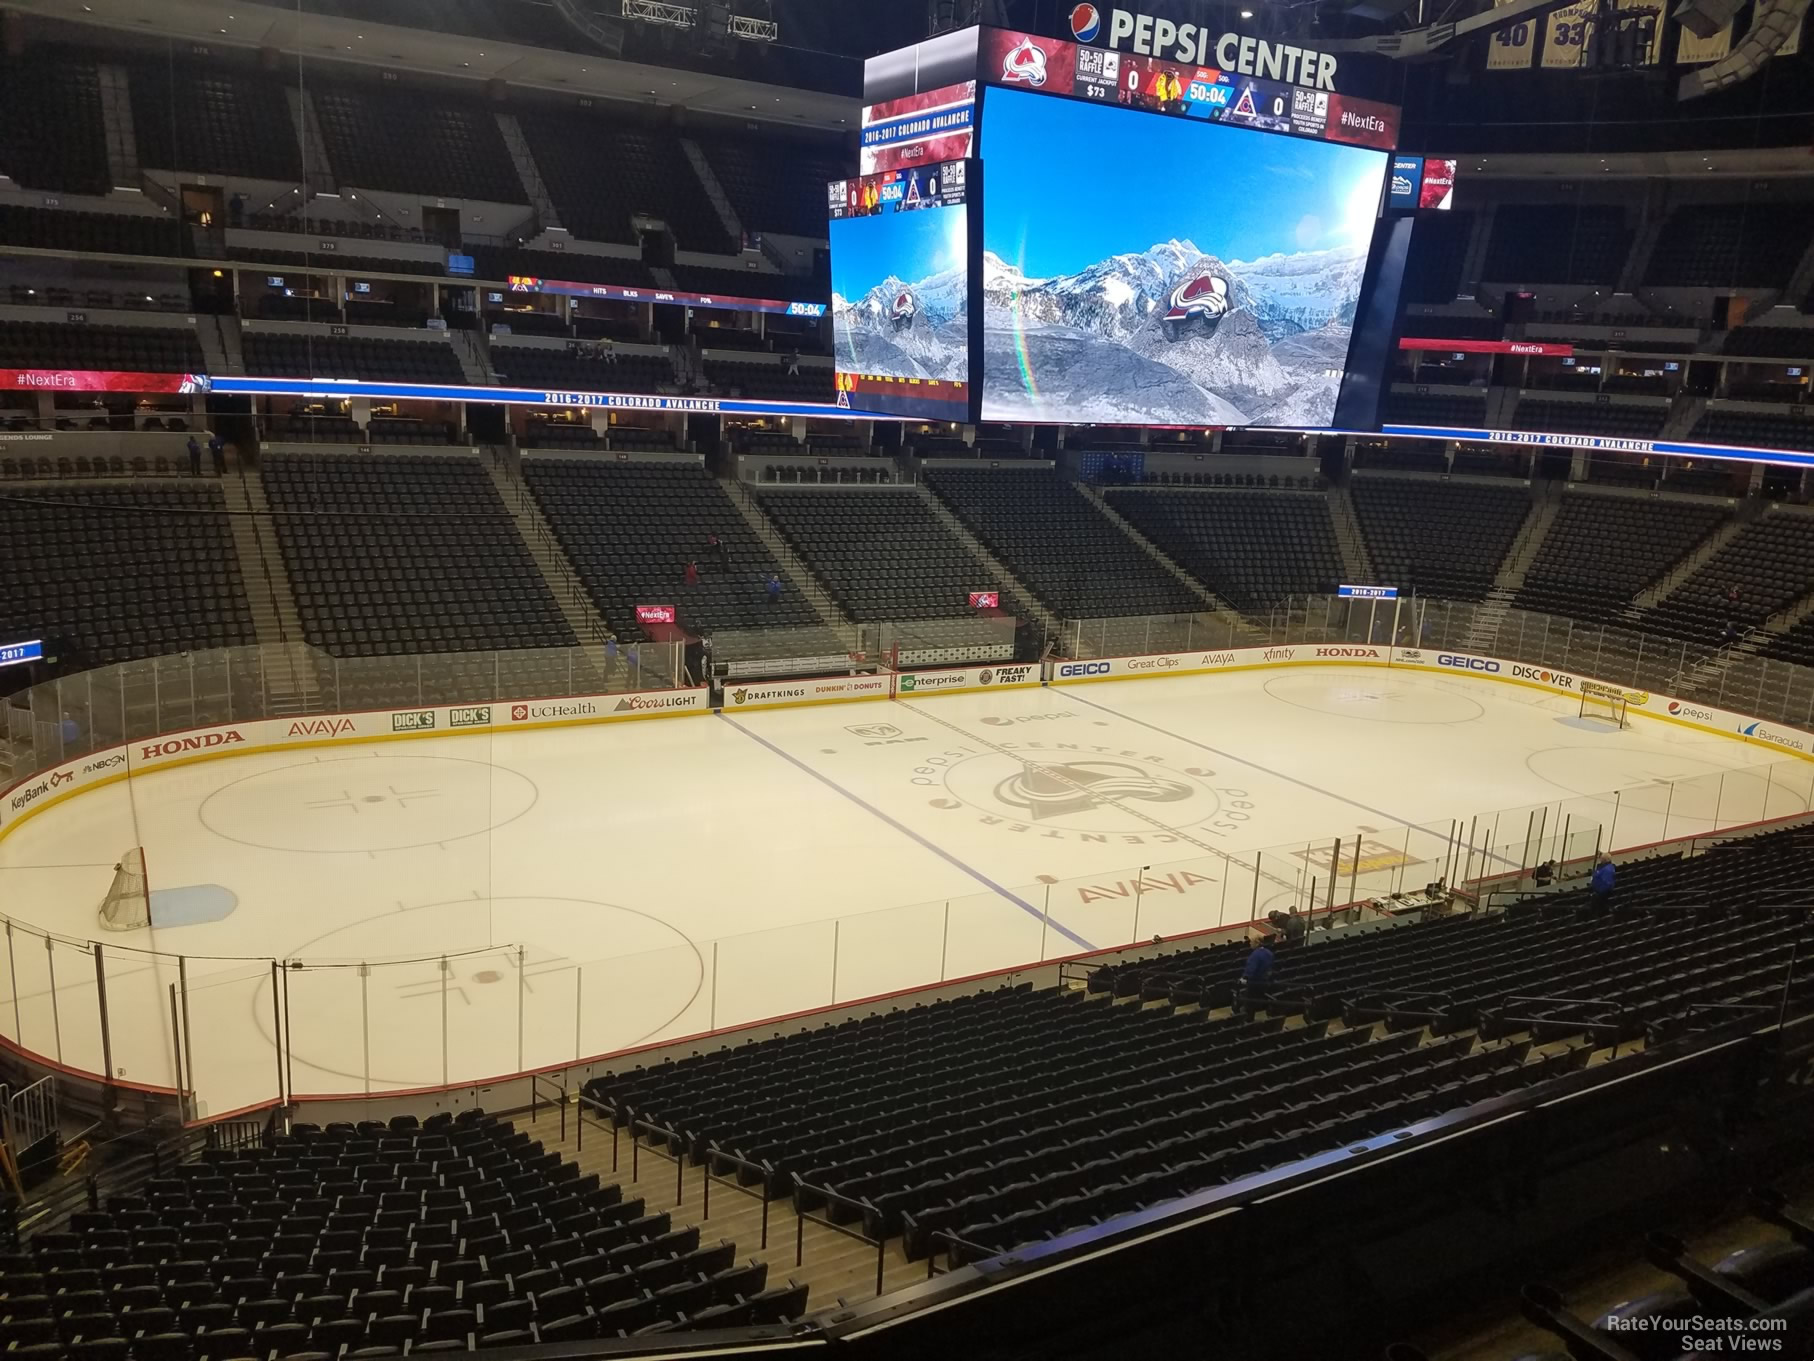 Timelapse: Pepsi Center goes from basketball court to ice rink